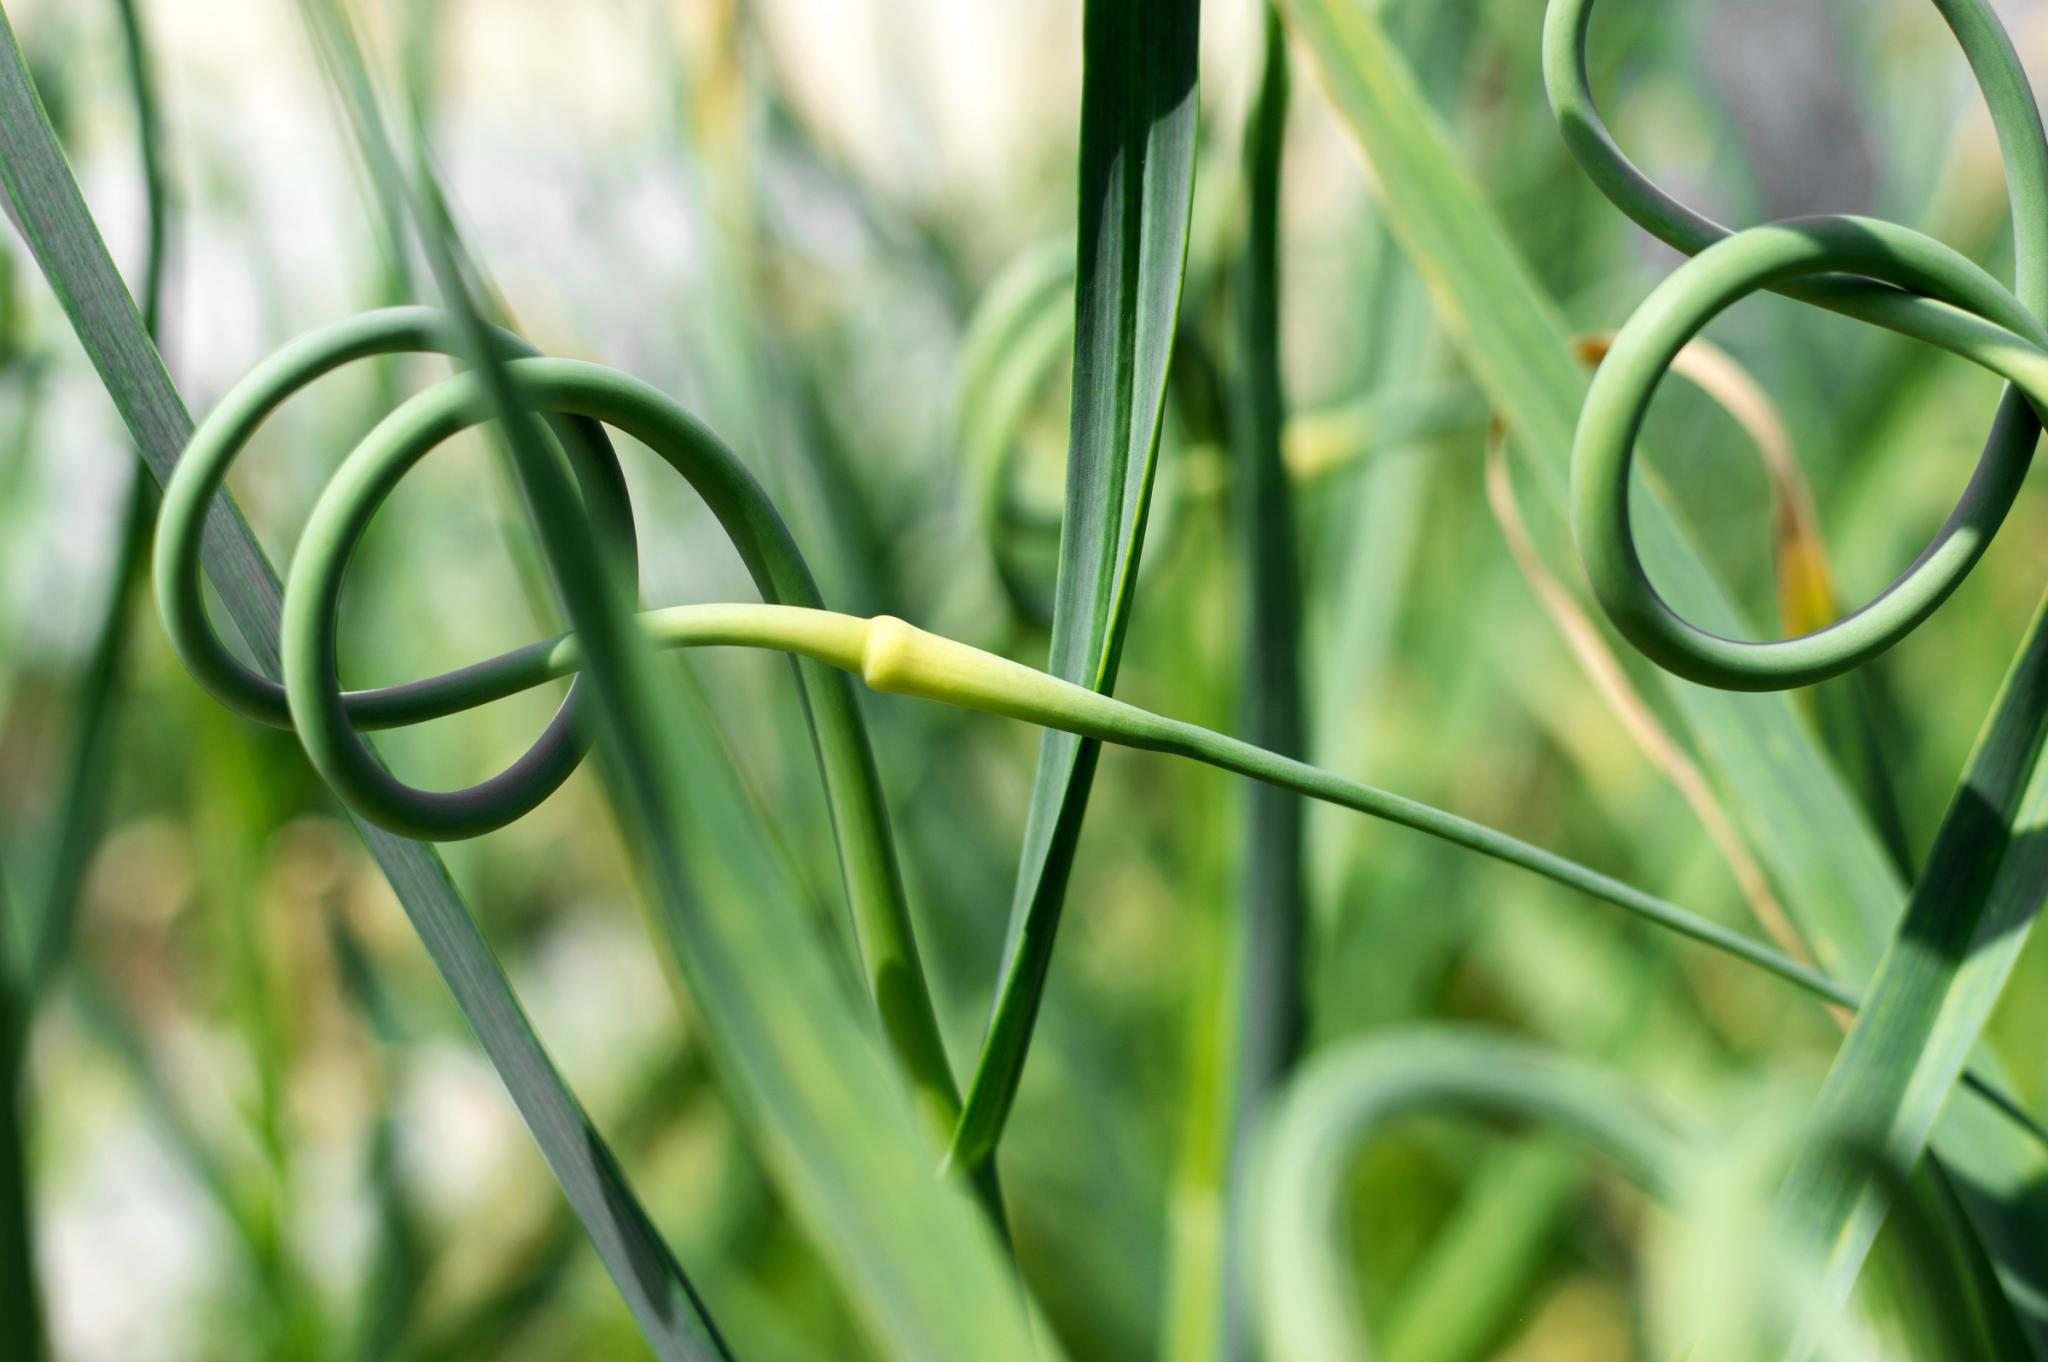 Garlic scapes. Photo by Mikhail Naumov/Getty Images